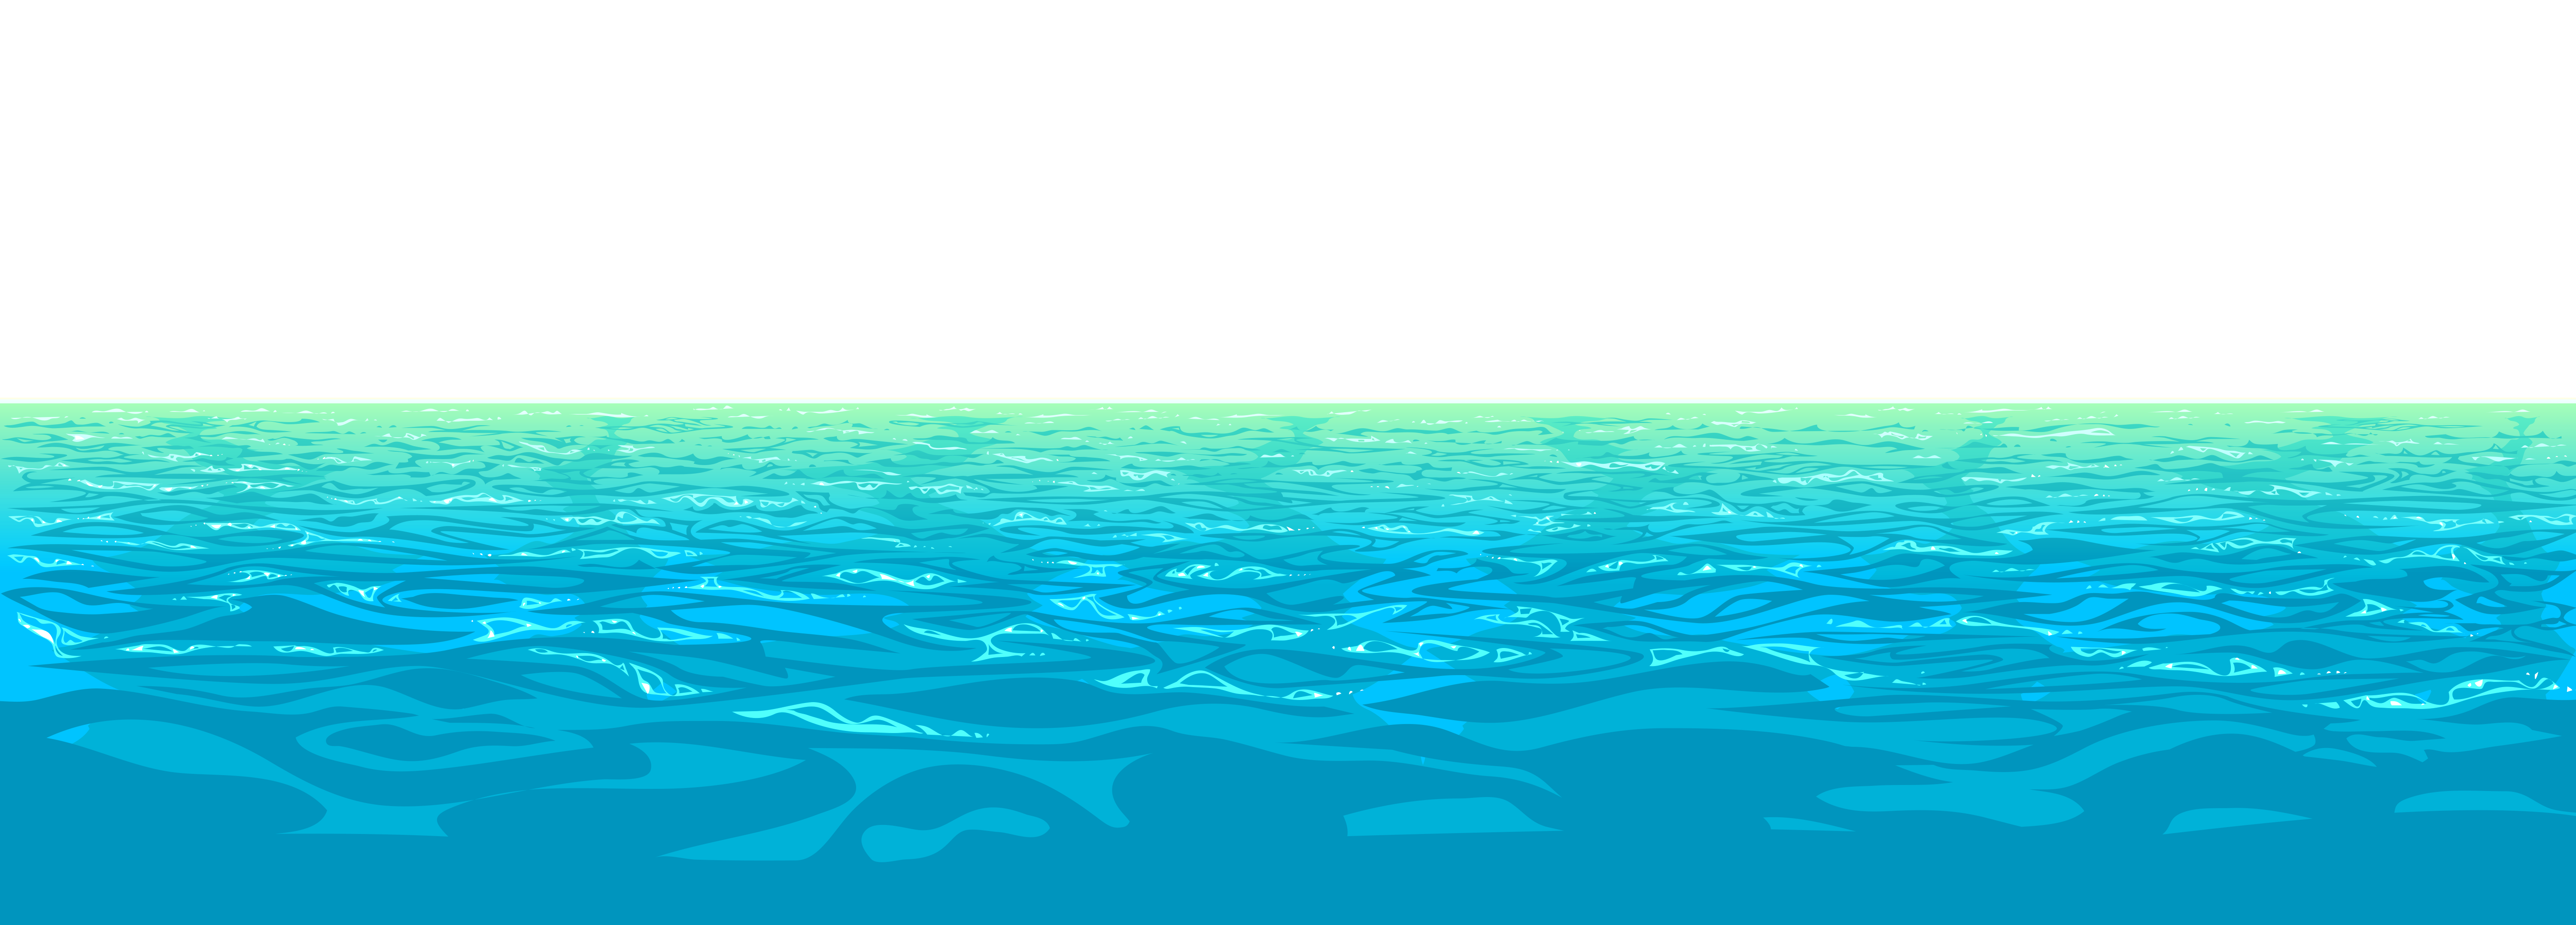 Waves clipart clear background.  collection of ocean